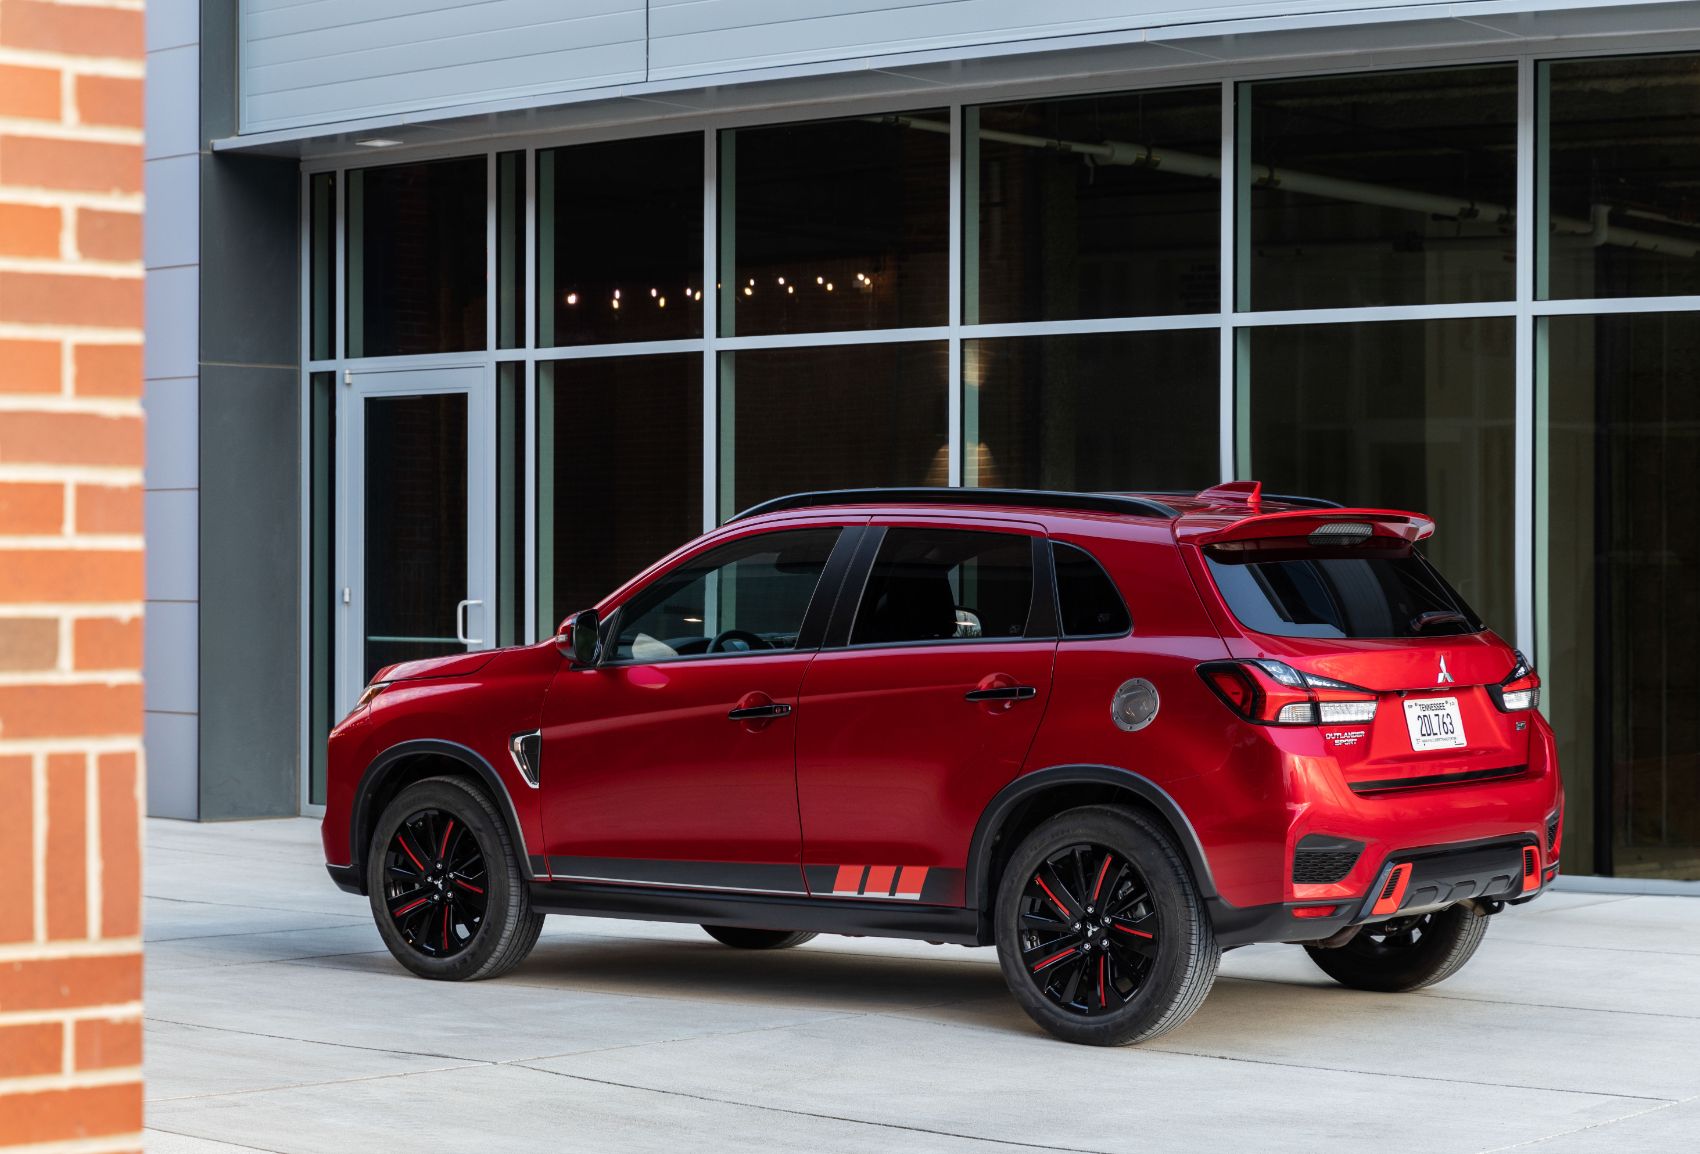 2021 Mitsubishi Outlander Sport Overview: Two New Trim Levels, Plus an ...